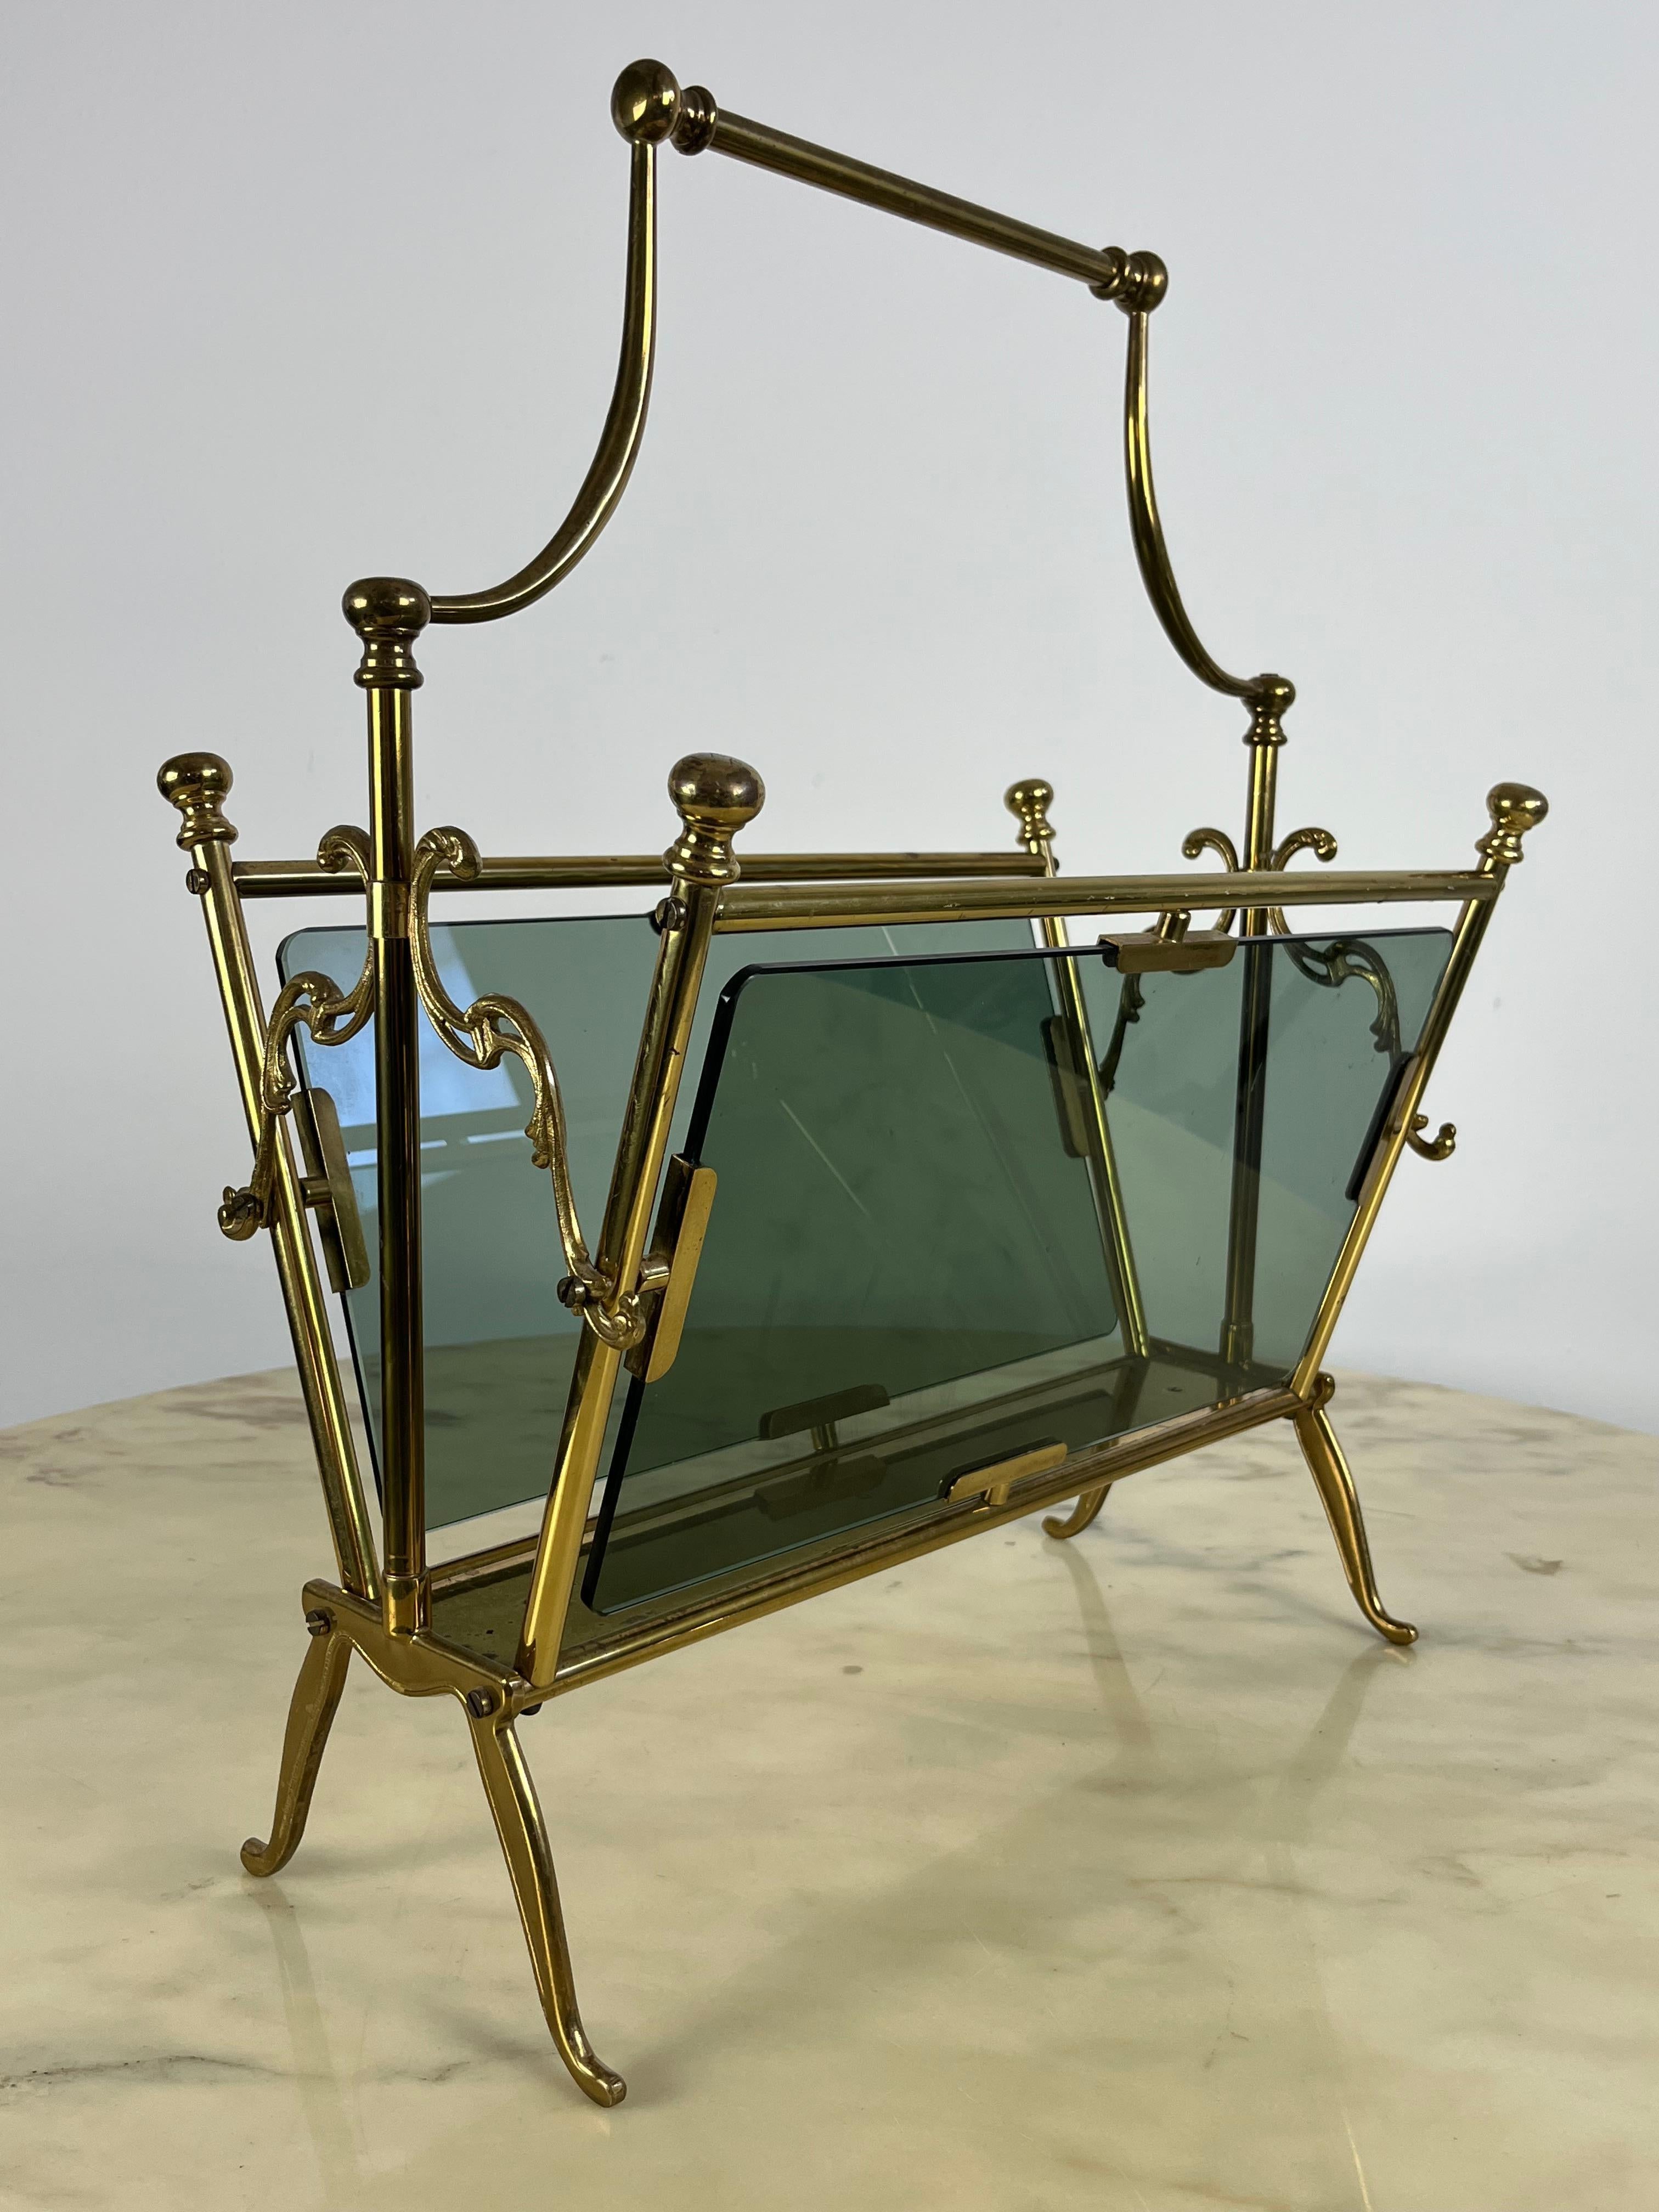 Magazine rack in brass and smoked glass, France, 1960.
Intact, shows signs of use and time.
Belonged to a family of landowners from Provence.